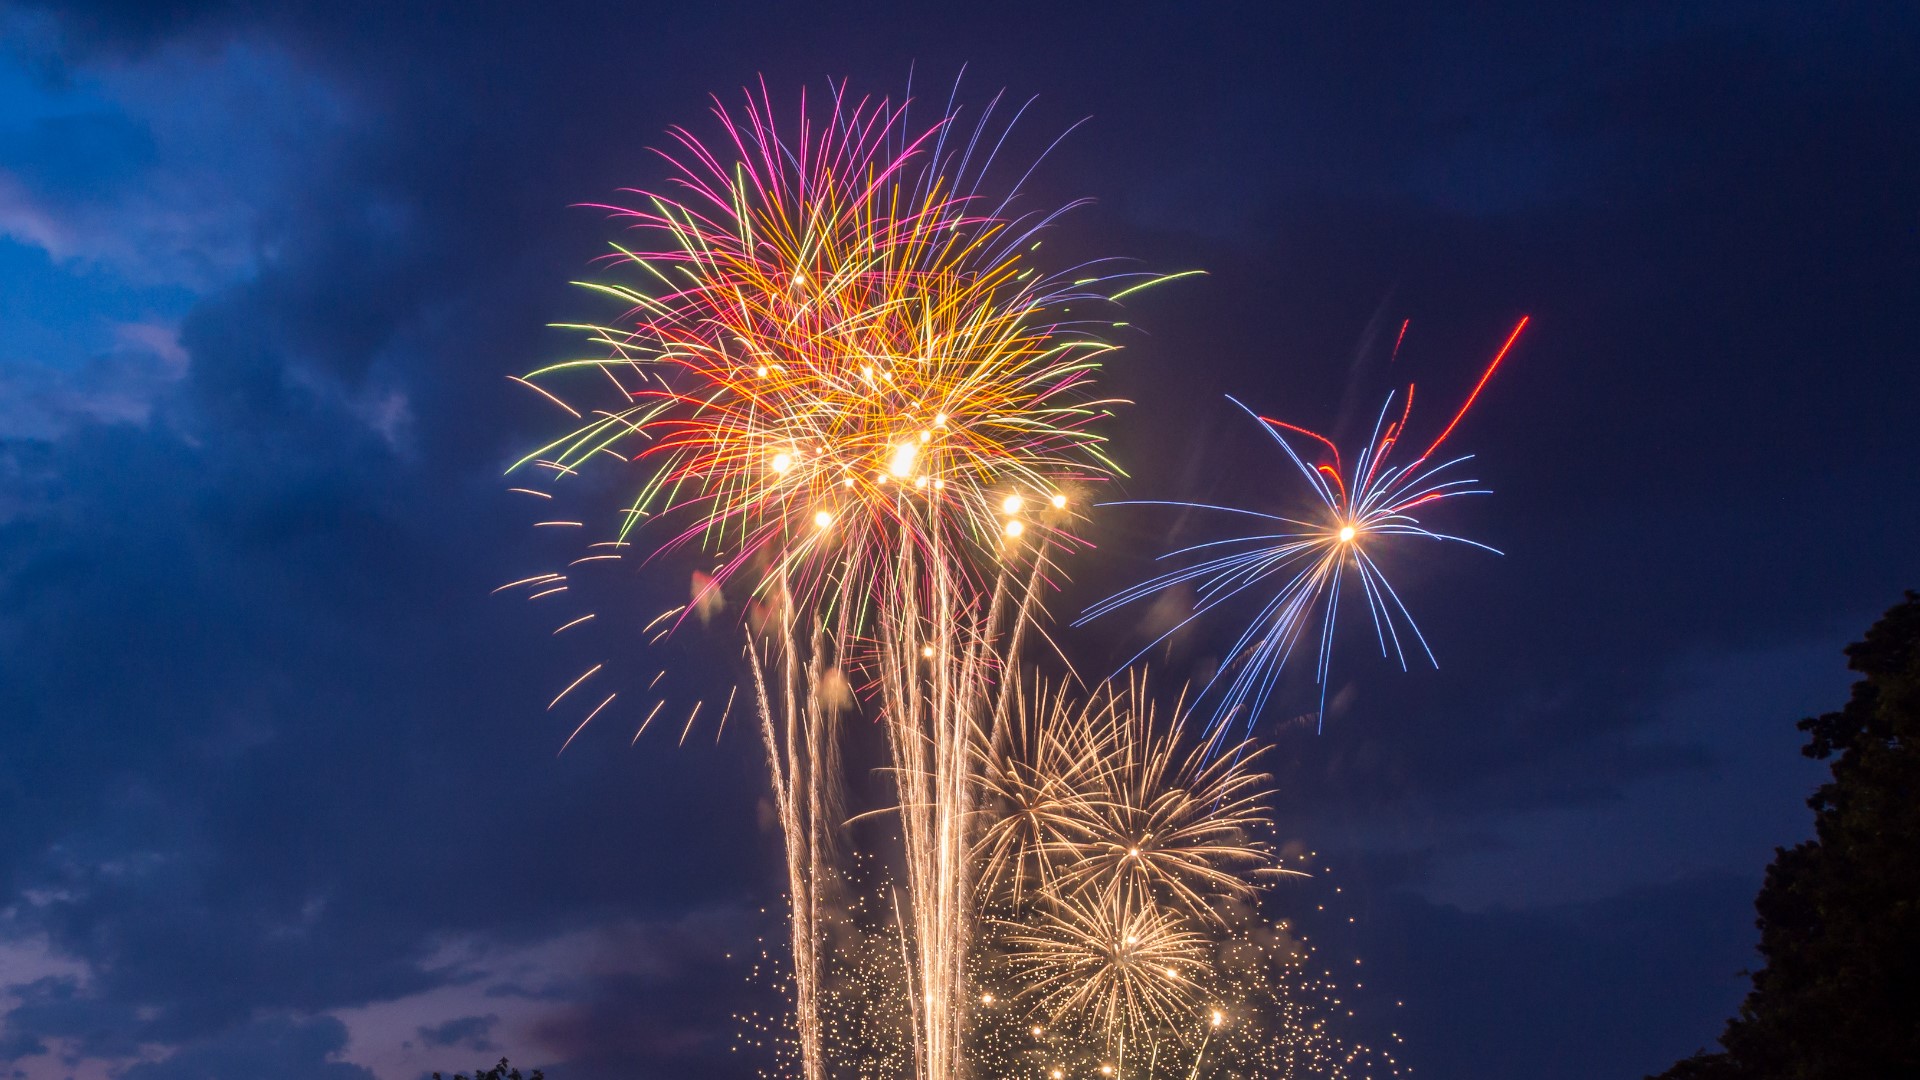 Currently, the law says that fireworks purchased in the state must be taken out of Ohio within 48 hours of purchase and can't be set off in the state.